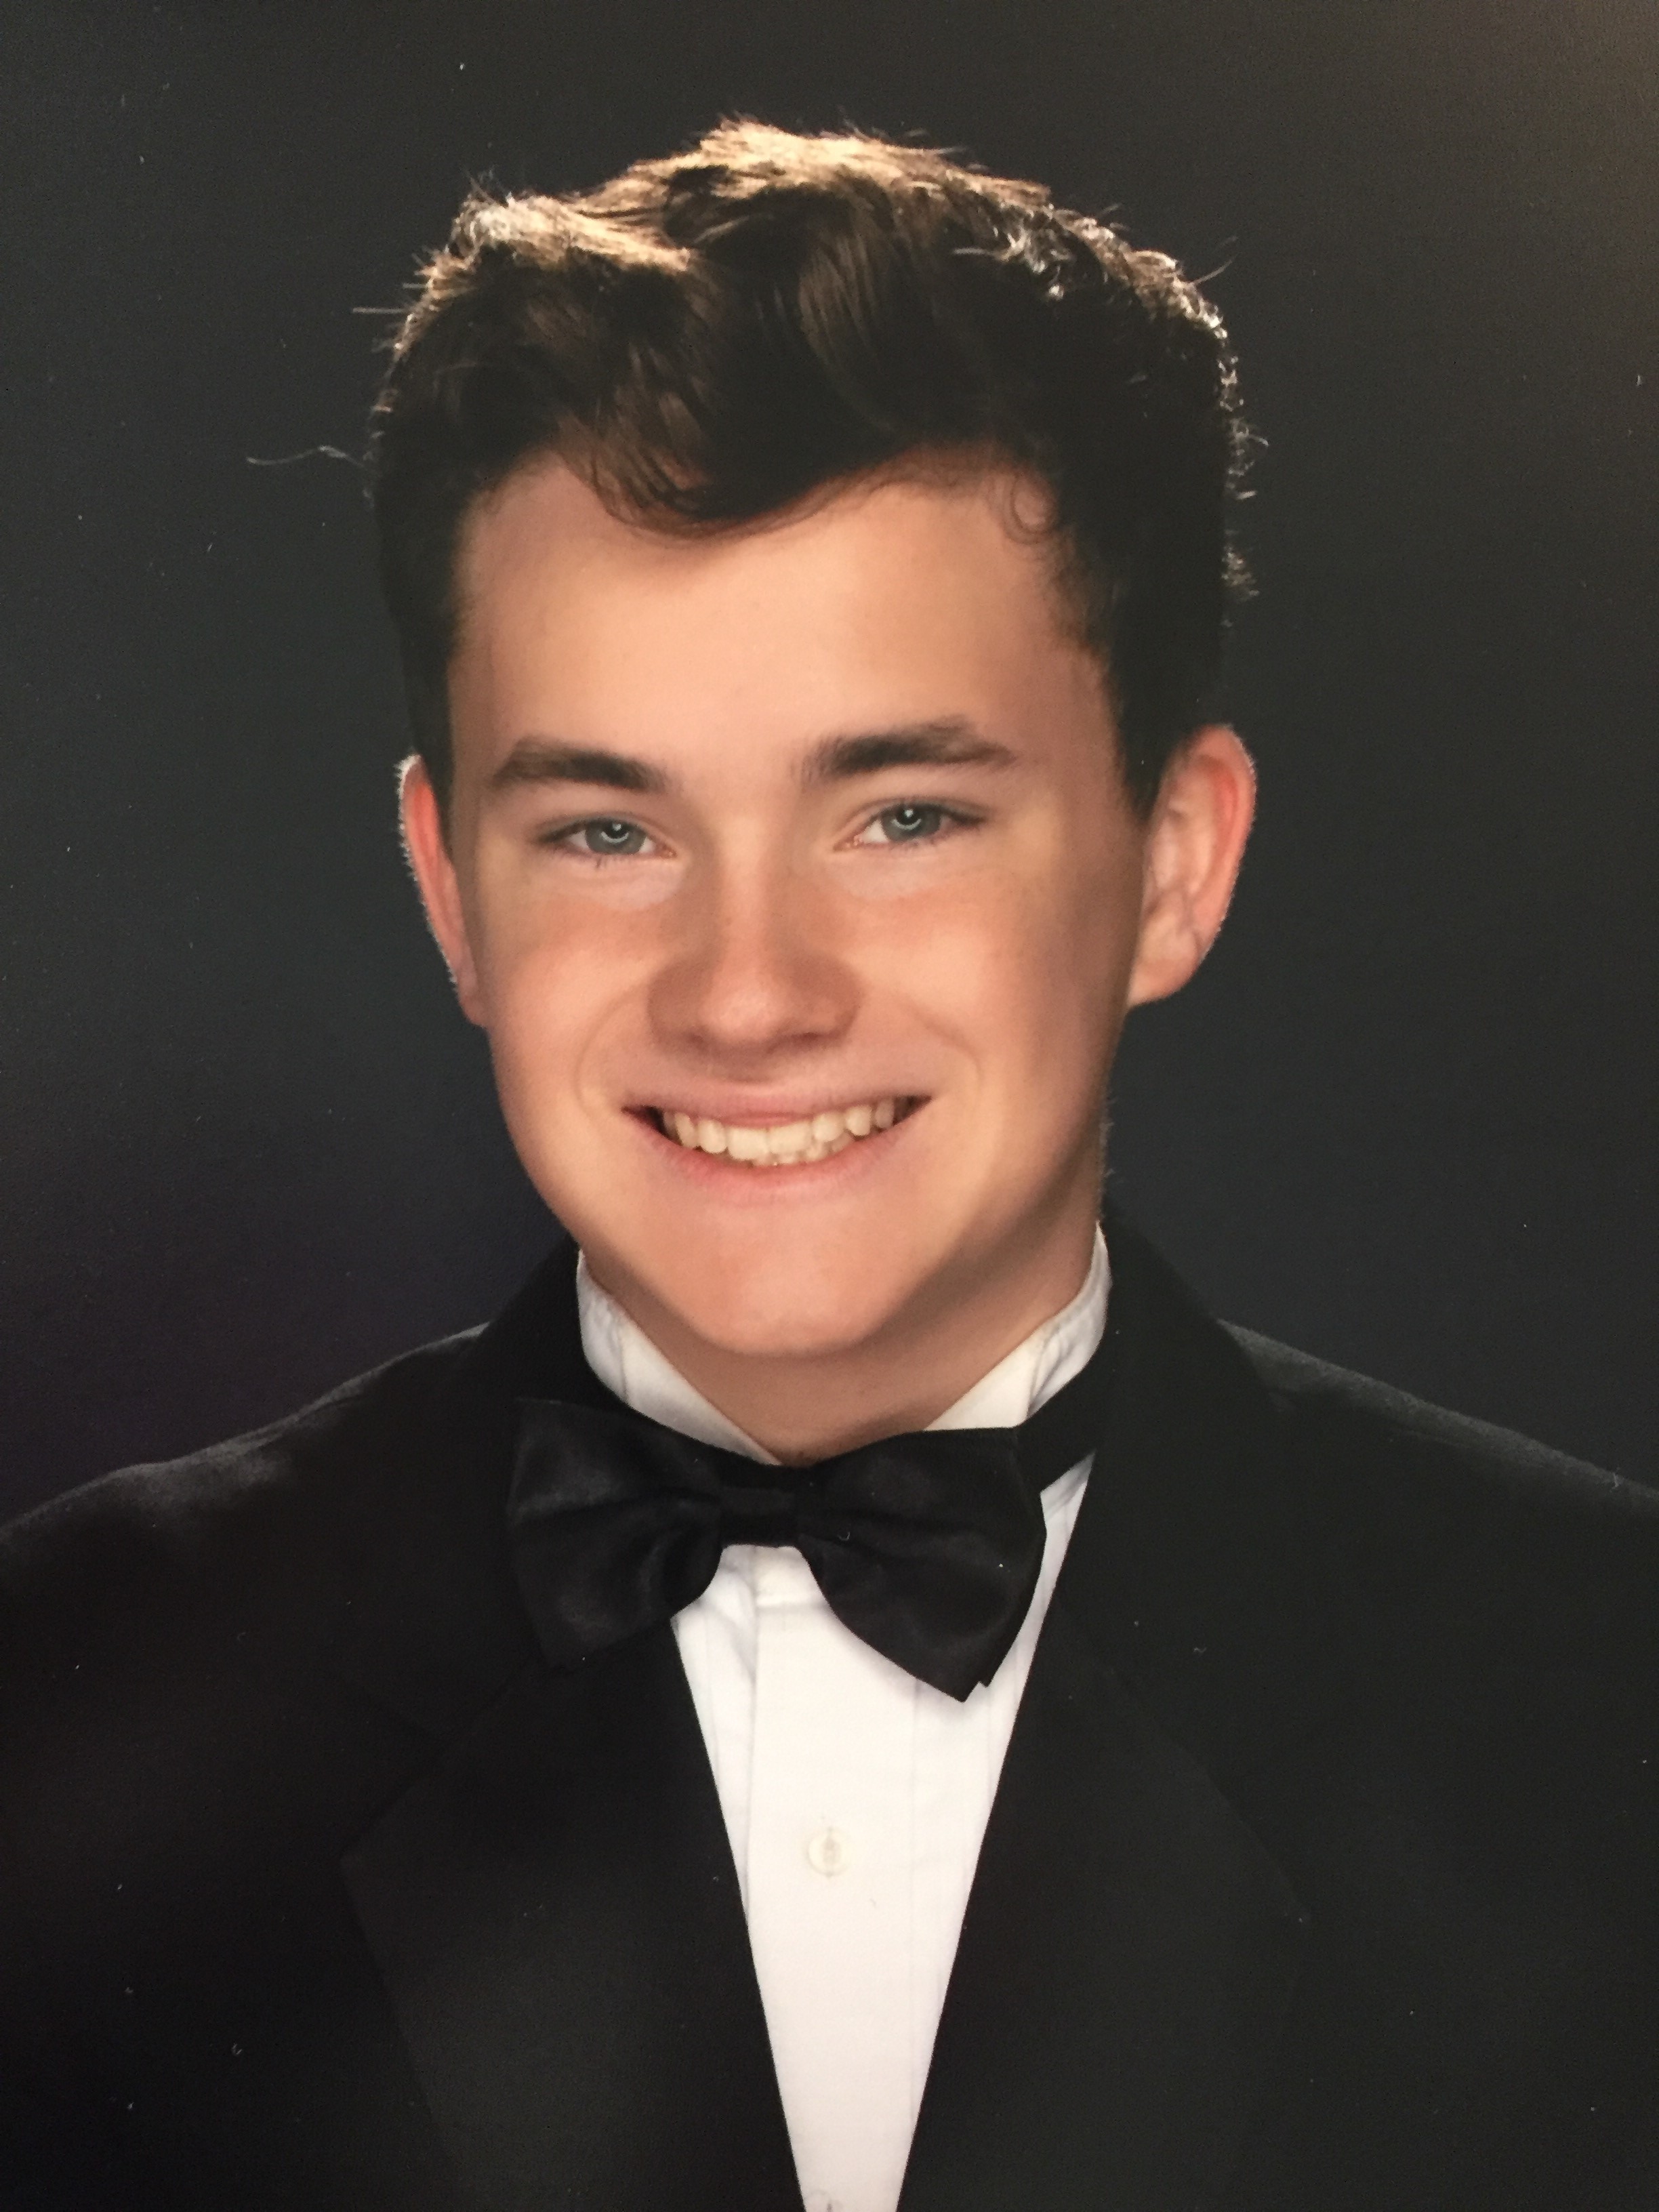 John-Paul Richardson of Chesapeake, Virginia is one of the winners of the 2019 Paul S Jessup Scholarship from Jessup Manufacturing Company.